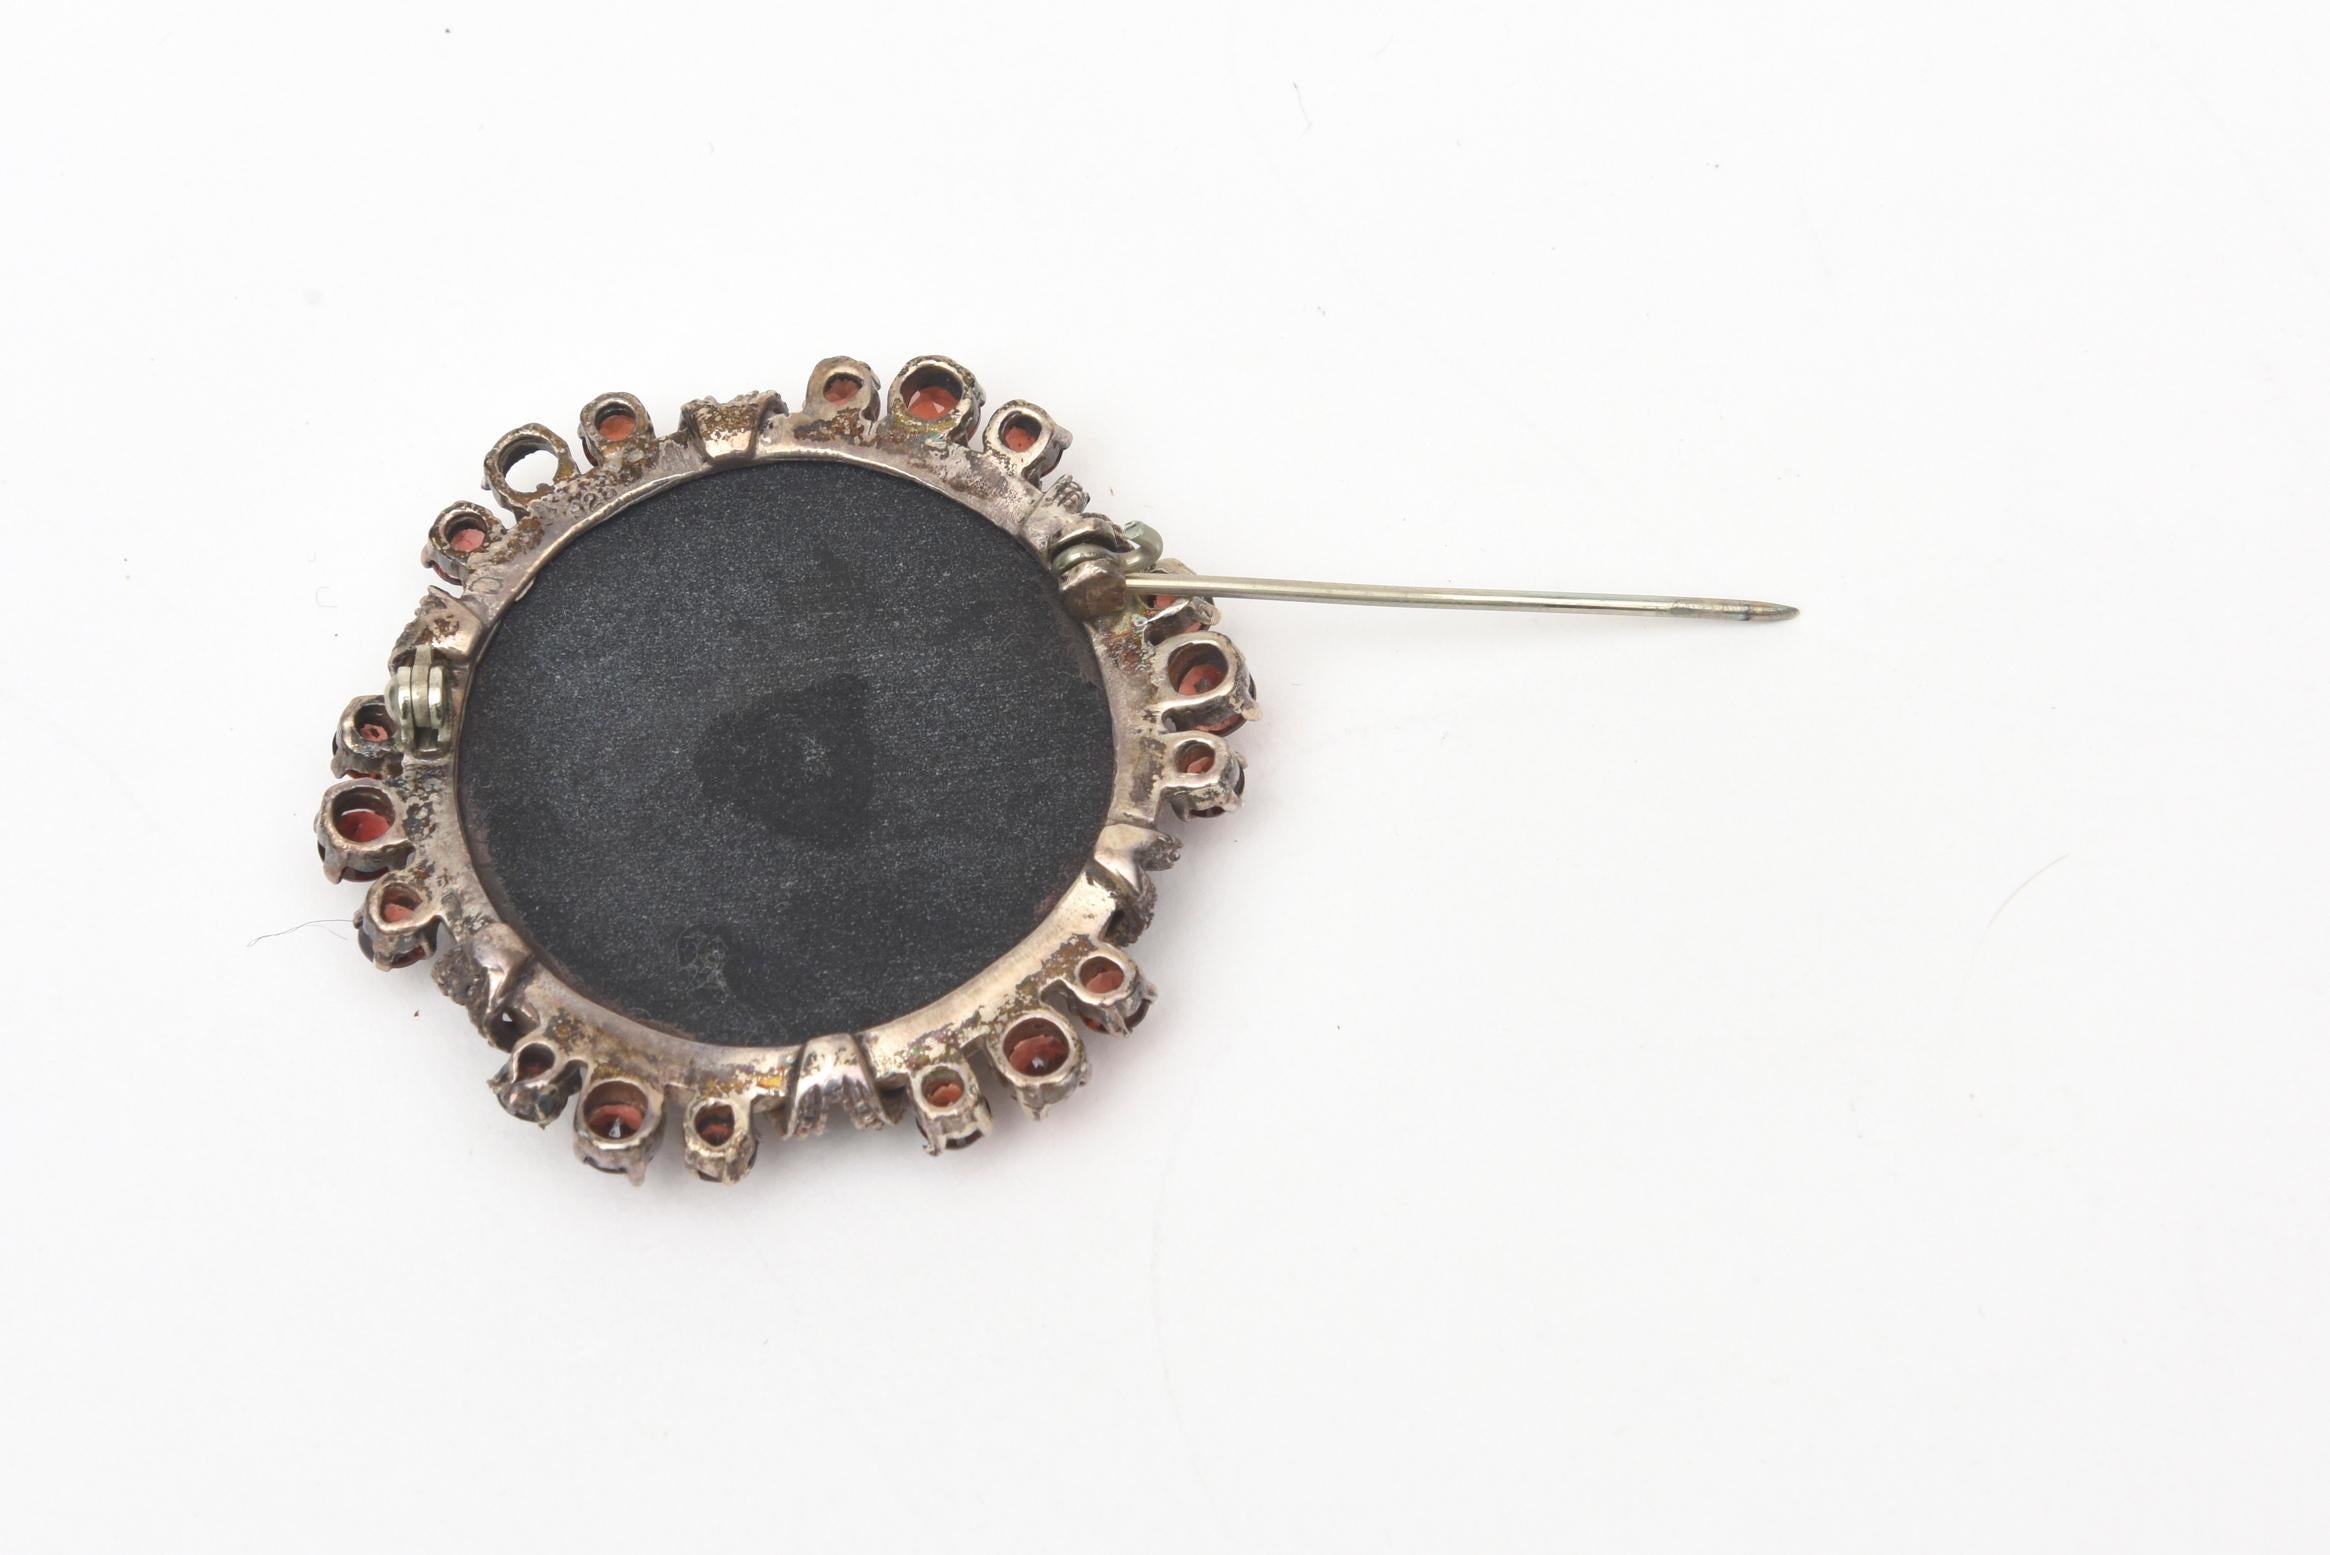 Onyx, Marquisette, Garnet and Sterling Silver Art Deco Pin Brooch 1